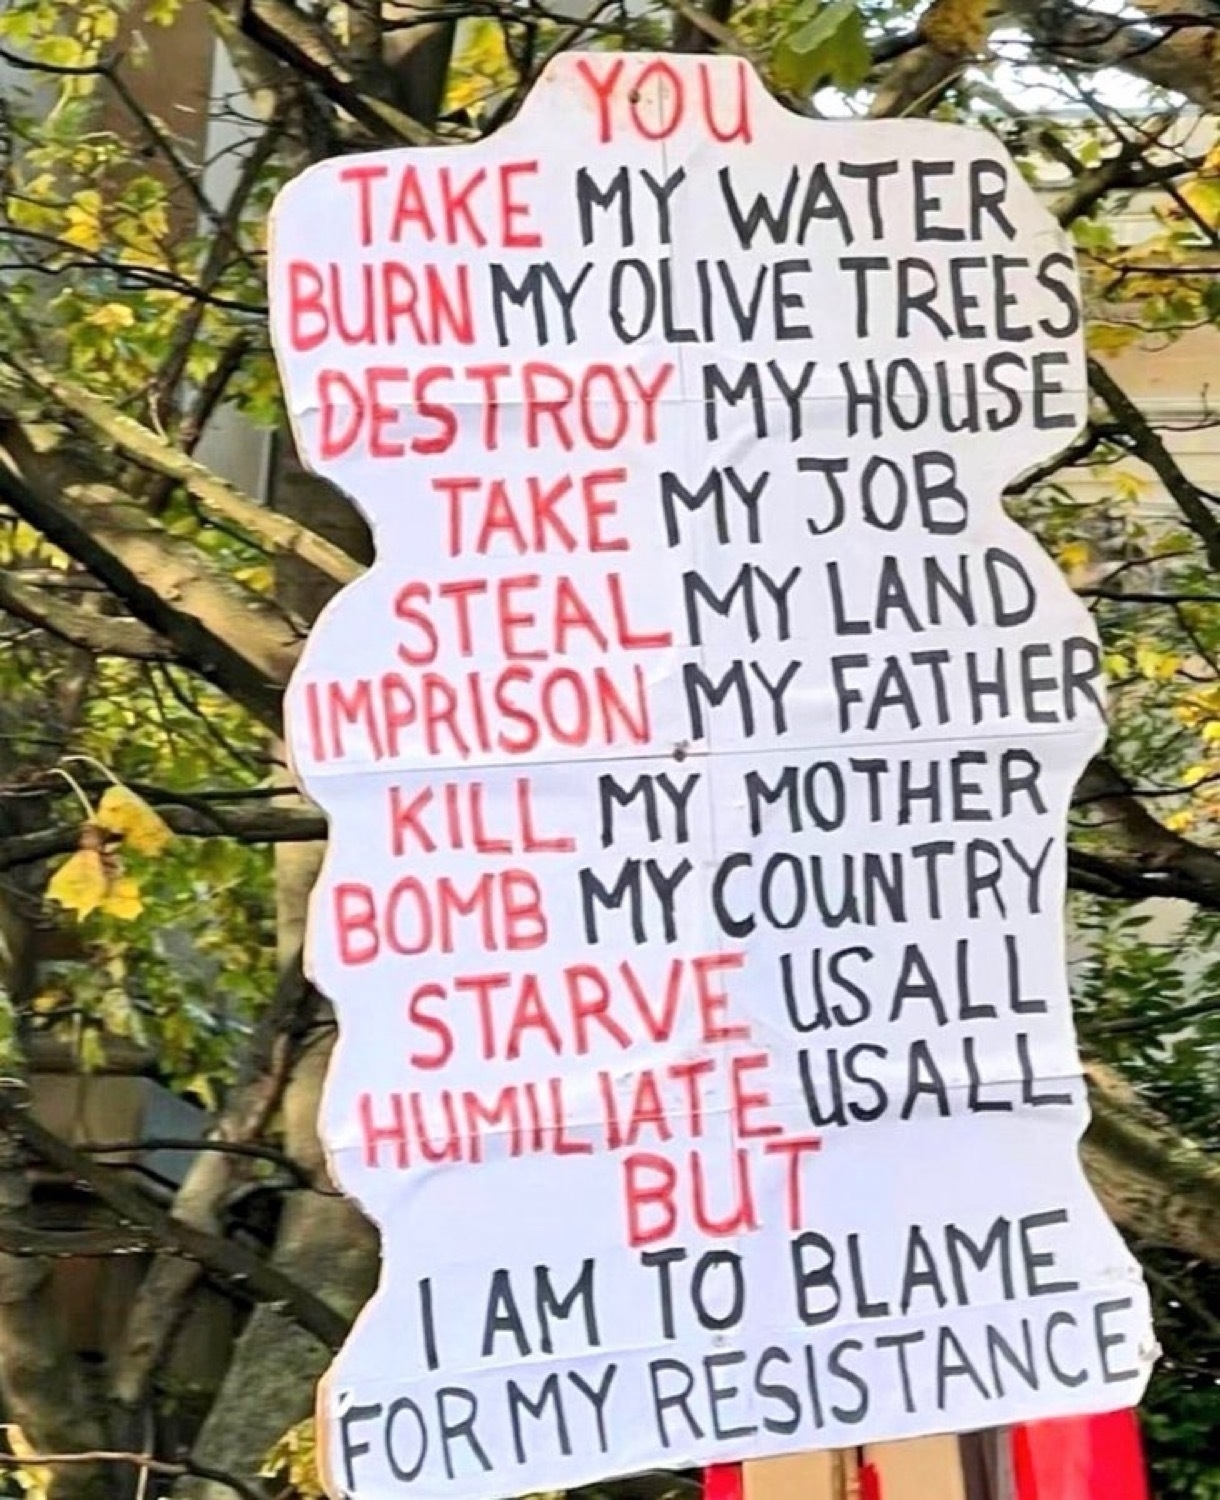 An image of a sign with this text: YOU TAKE MY WATER-BURN MY OLIVE TREES-DESTROY MY HOUSE-TAKE MY JOB-STEAL MY LAND -IMPRISON MY FATHER KILL MY MOTHER-BOMB MY COUNTRY-STARVE US ALL-HUMILIATE US ALL-BUT-I AM TO BLAME FOR MY RESISTANCE